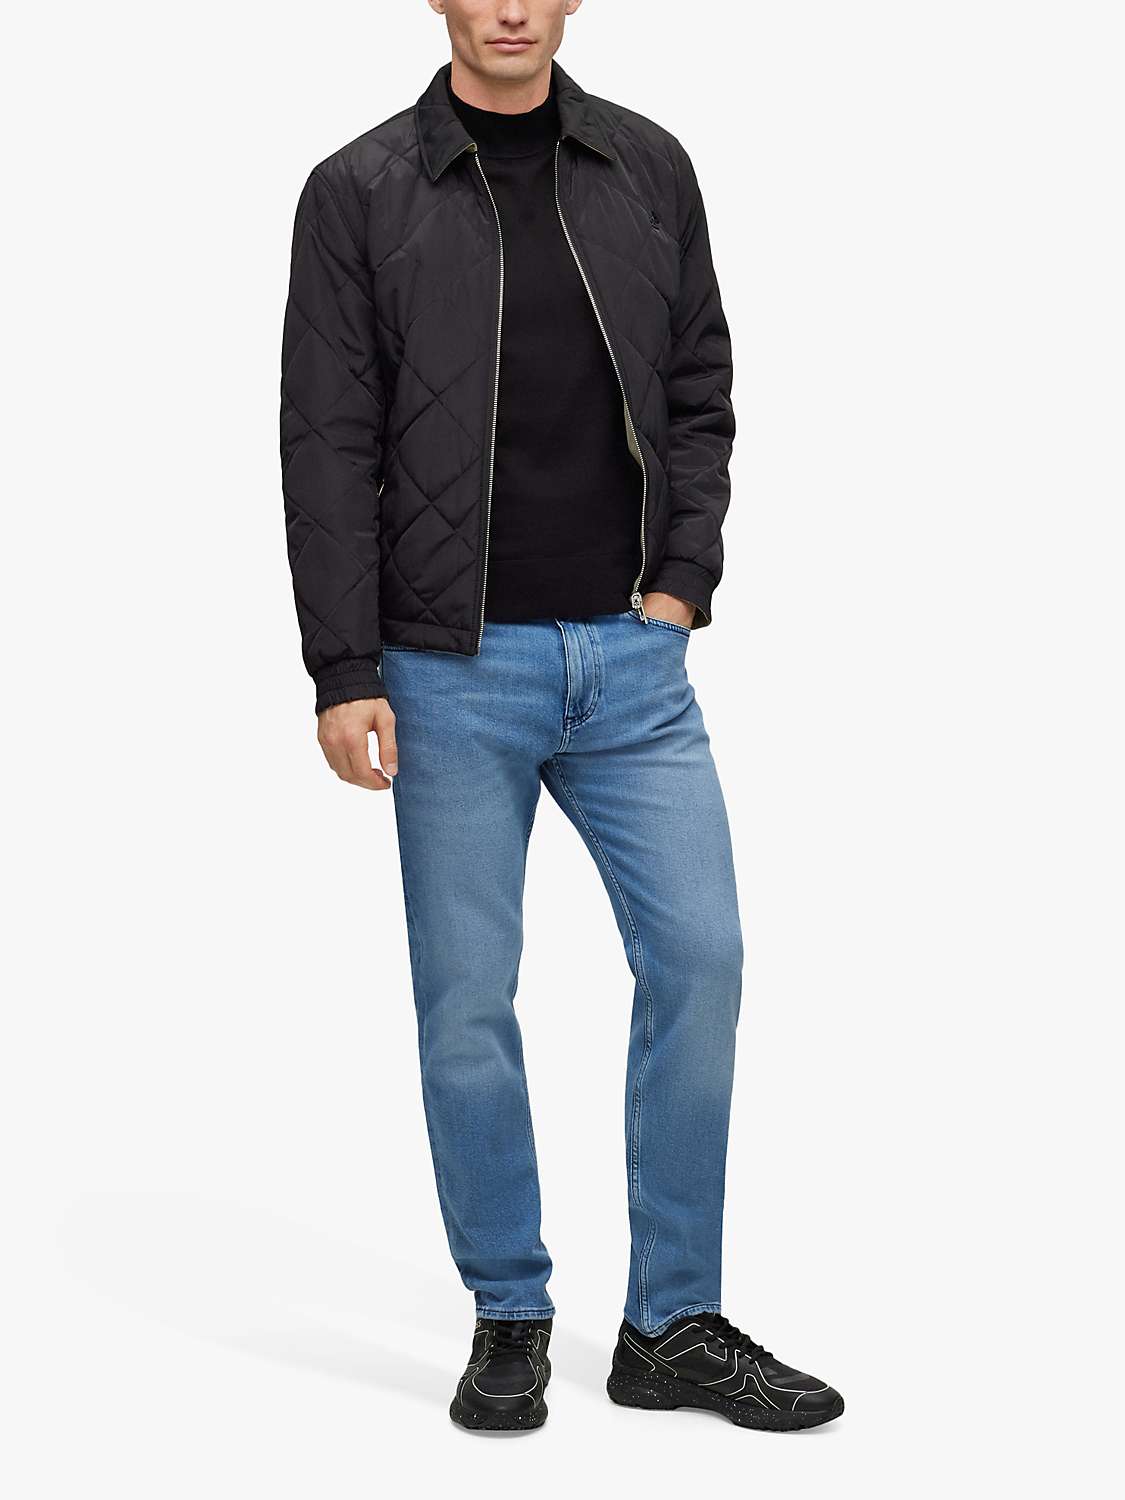 BOSS Taber 449 Tapered Fit Jeans, Turquoise/Aqua at John Lewis & Partners